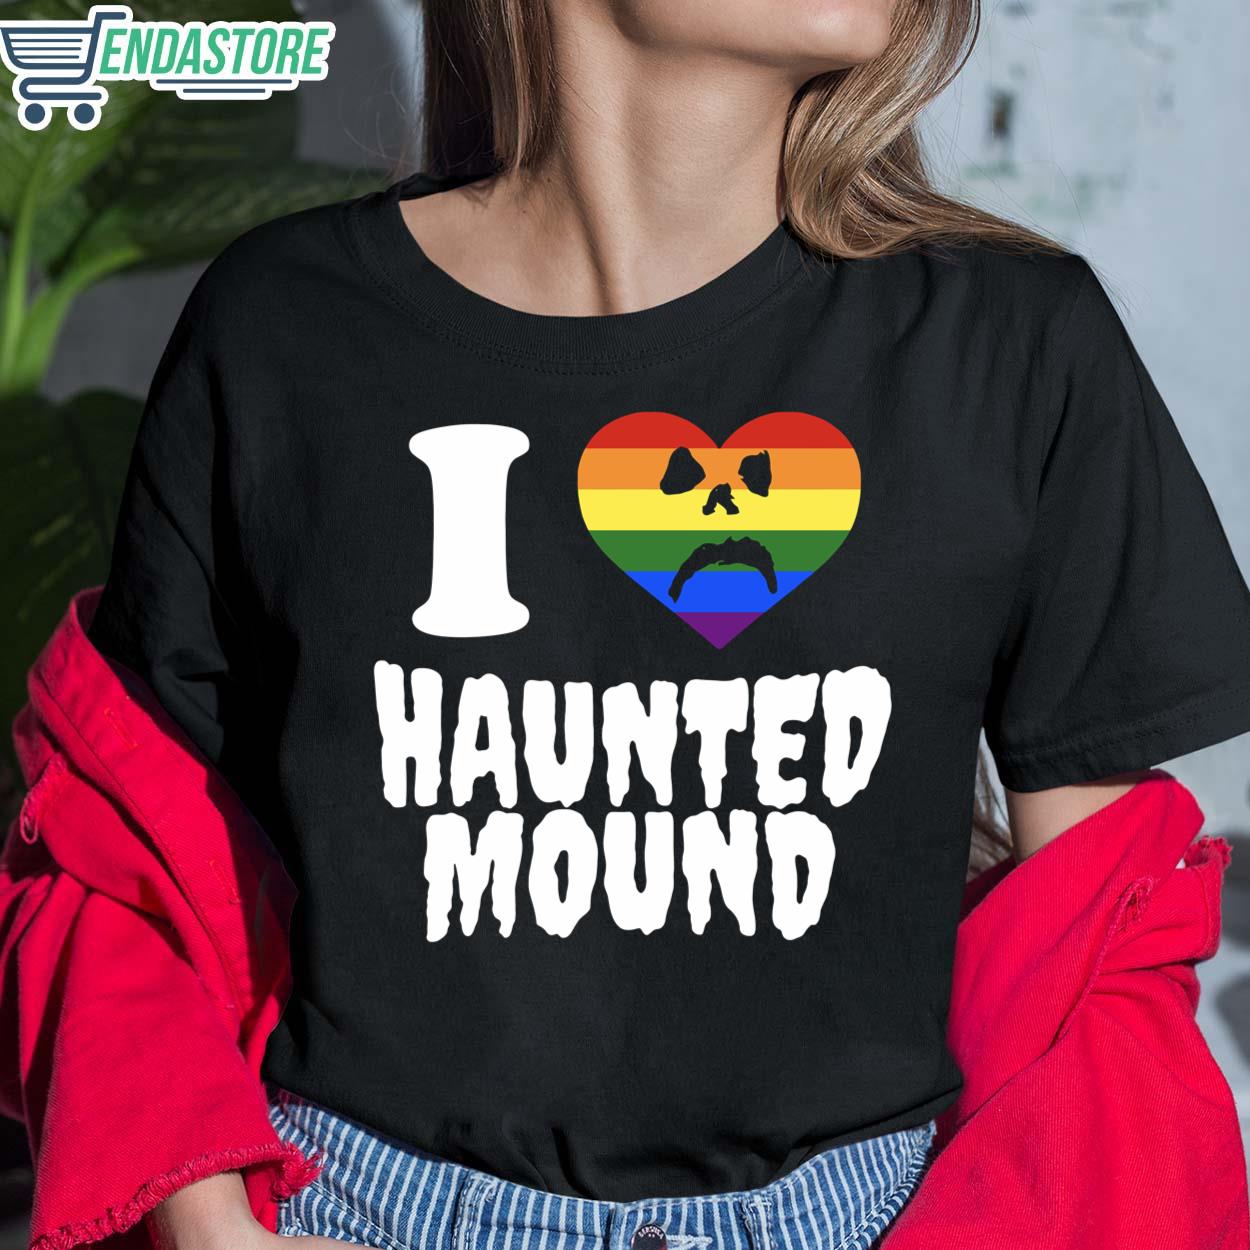 well guys, i guess that's it. : r/HauntedMound